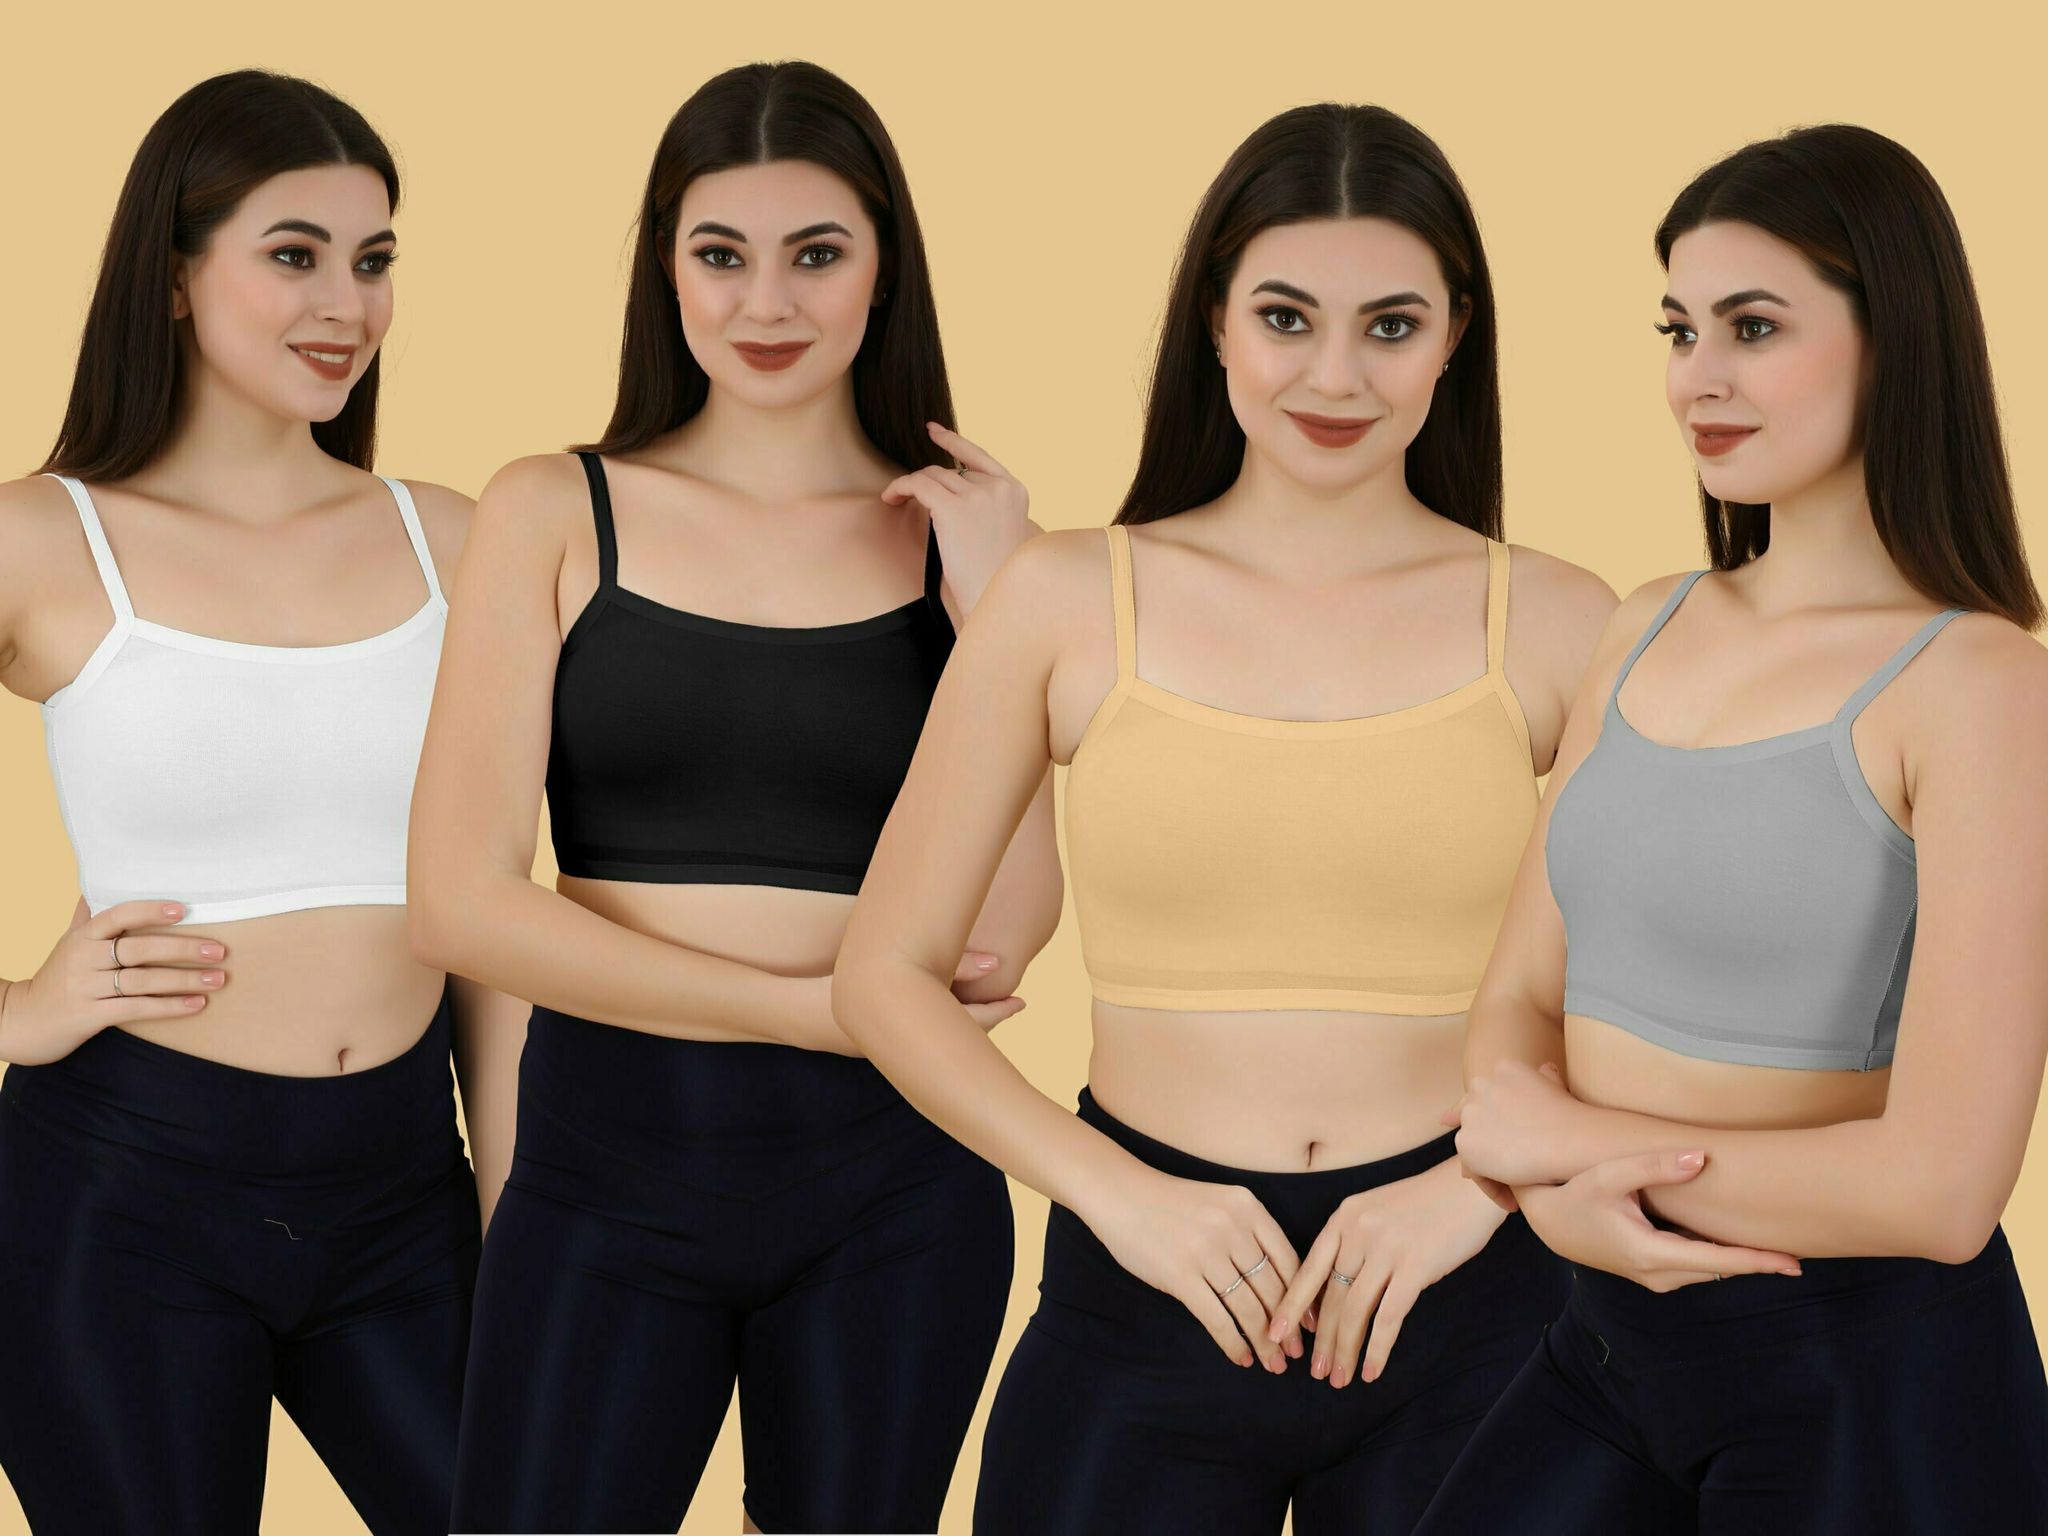 Slip-on Strapless Bra for Teenagers, Girls Beginners Bra Sports Cotton  Non-Padded Stylish Crop Top Bra Full Coverage Seamless Non-Wired Gym  Workout